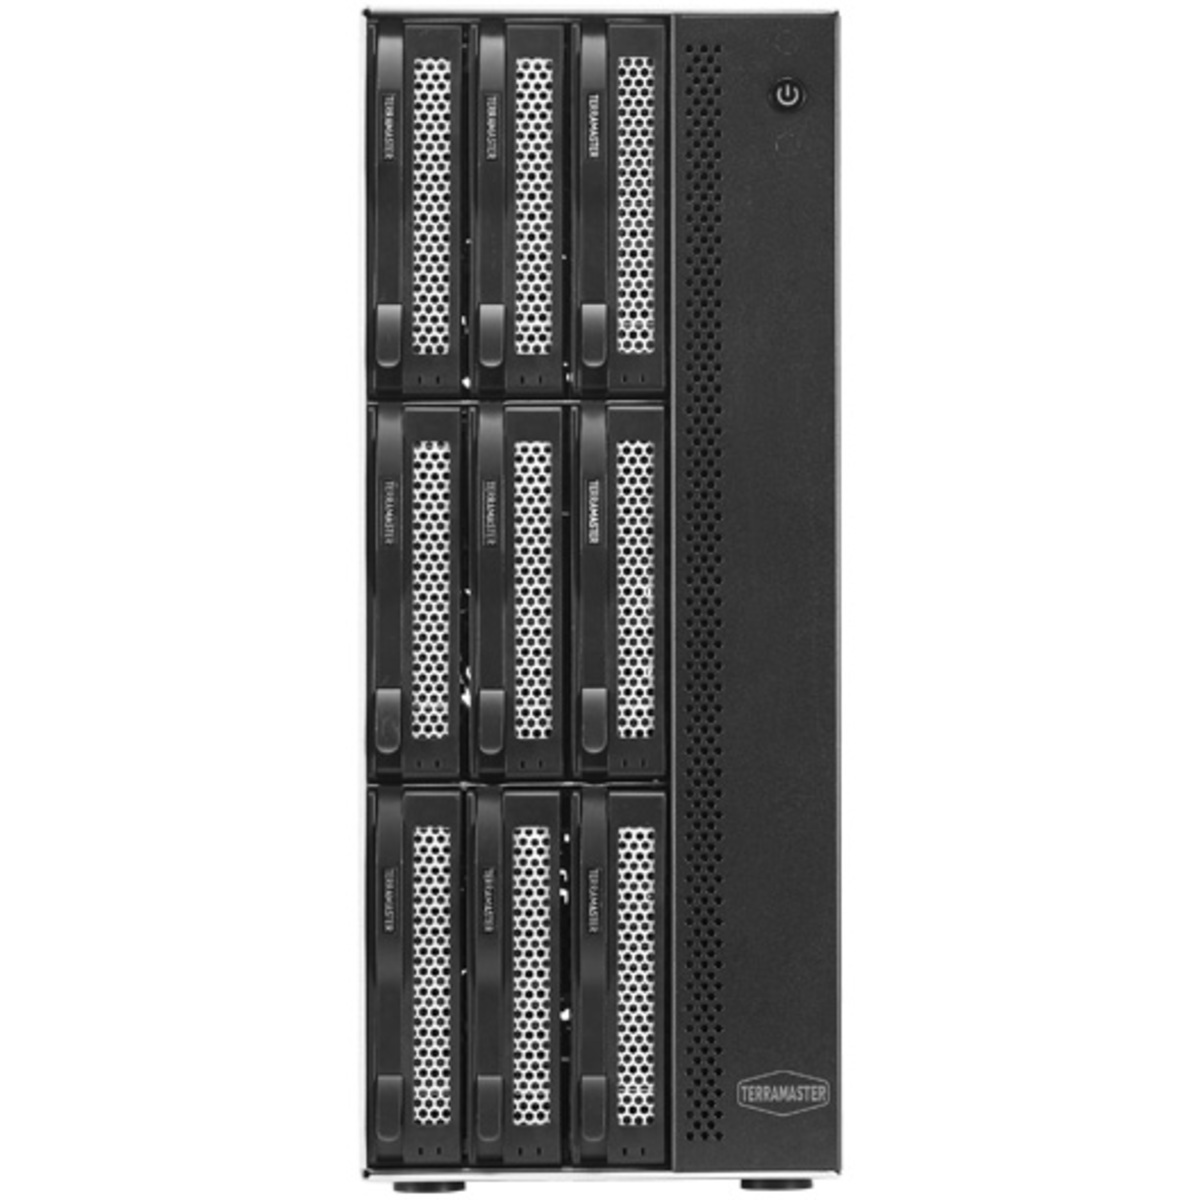 TerraMaster T9-450 90tb 9-Bay Desktop Multimedia / Power User / Business NAS - Network Attached Storage Device 9x10tb Western Digital Red Pro WD102KFBX 3.5 7200rpm SATA 6Gb/s HDD NAS Class Drives Installed - Burn-In Tested T9-450